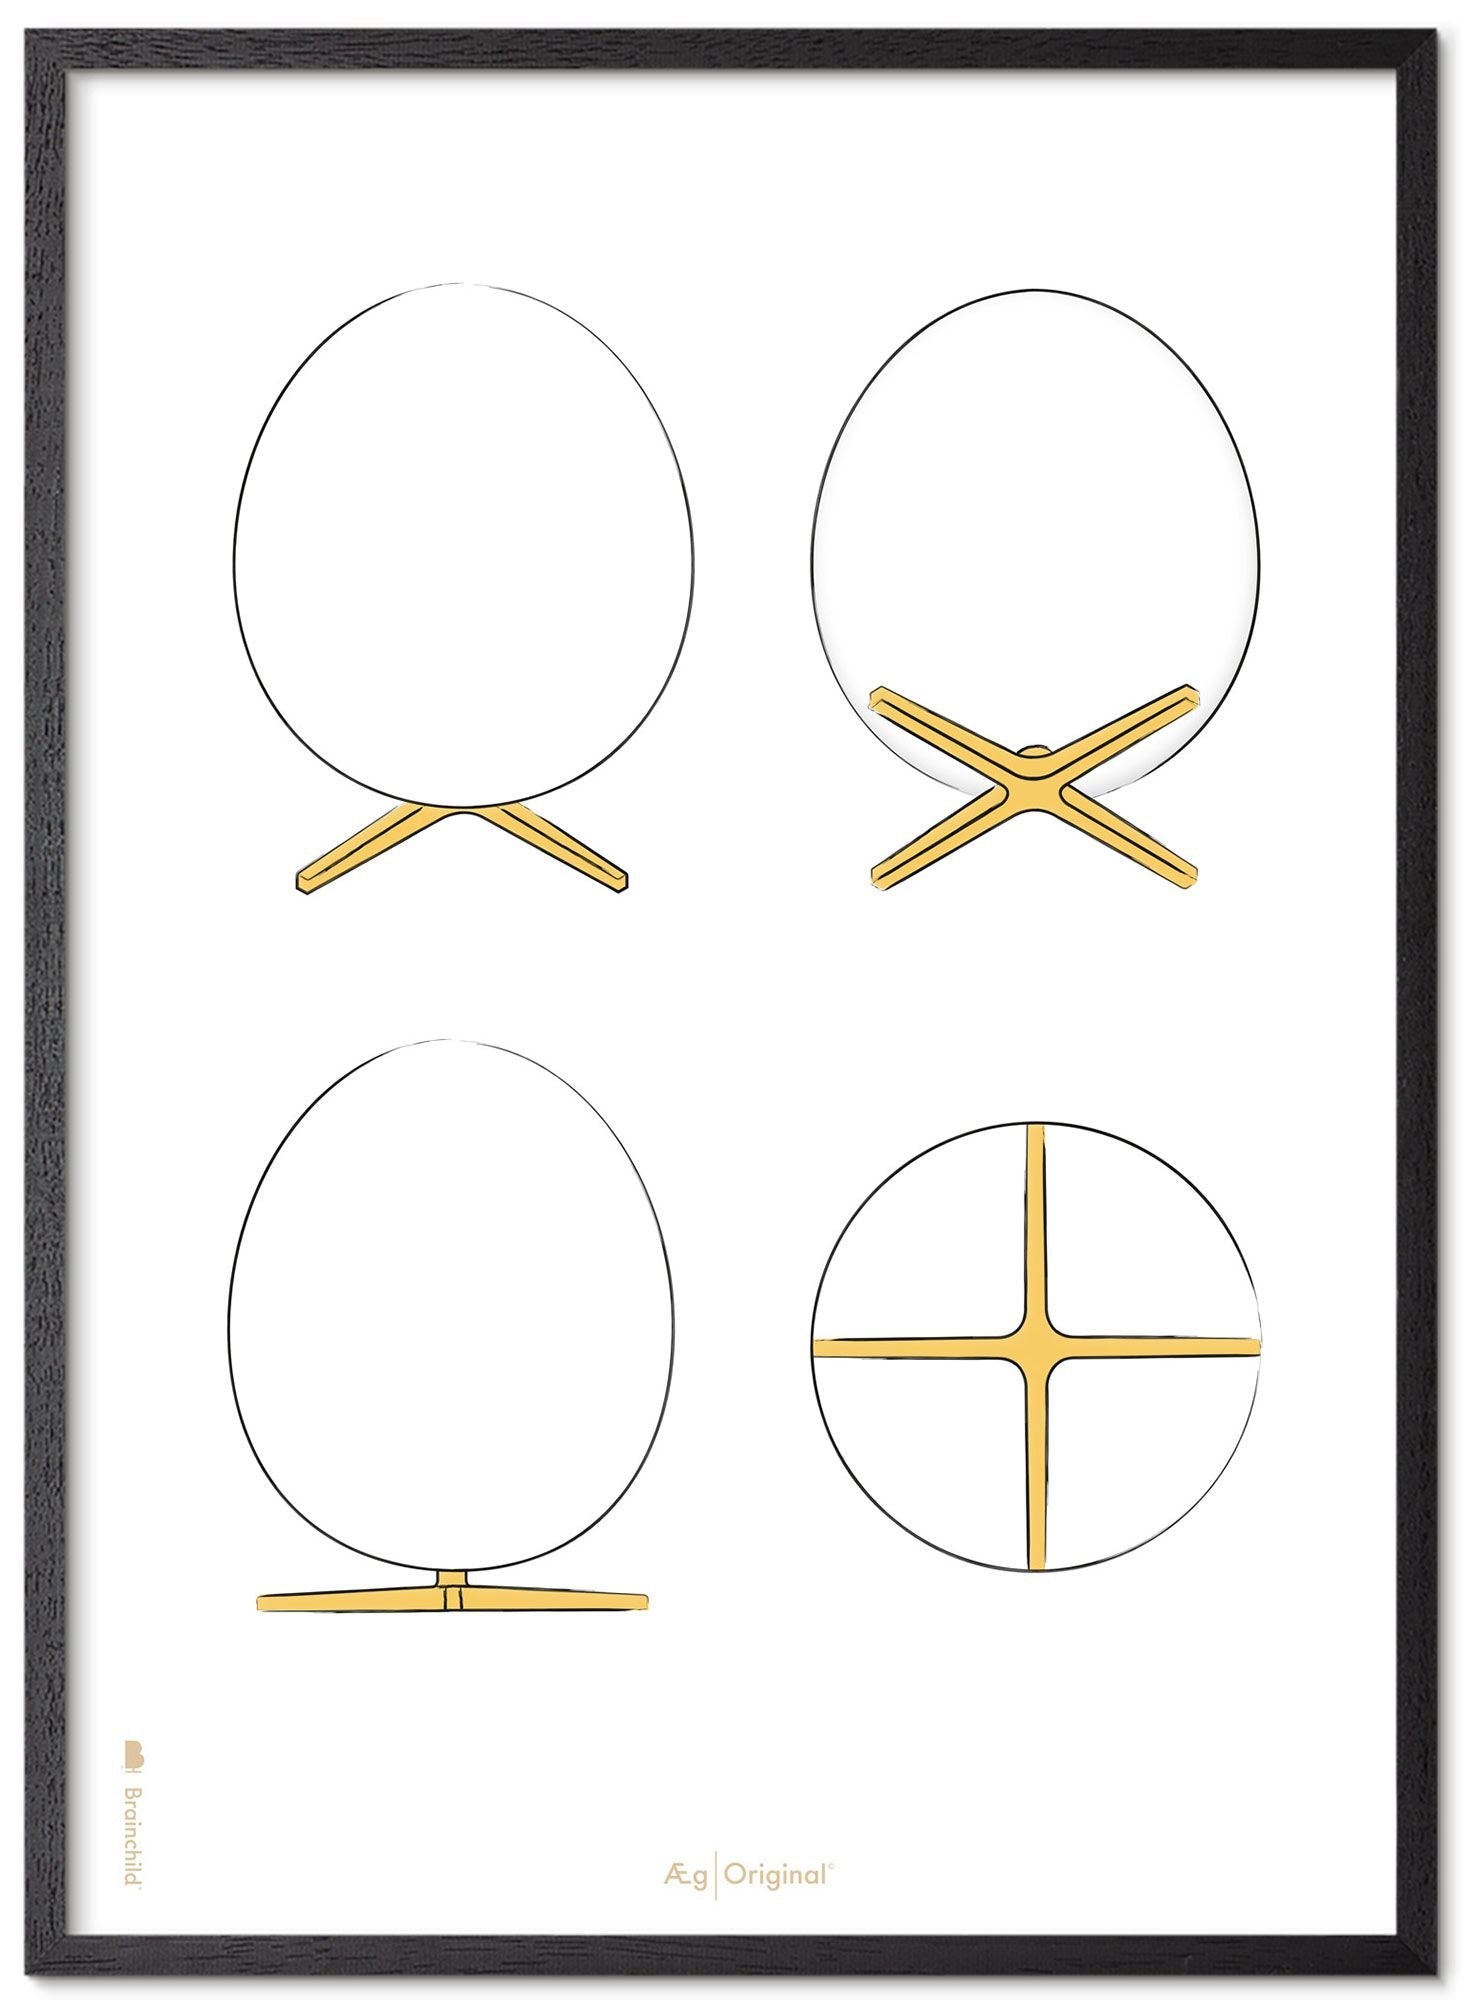 Brainchild The Egg Design Sketches Poster Frame Made Of Black Lacquered Wood 70x100 Cm, White Background